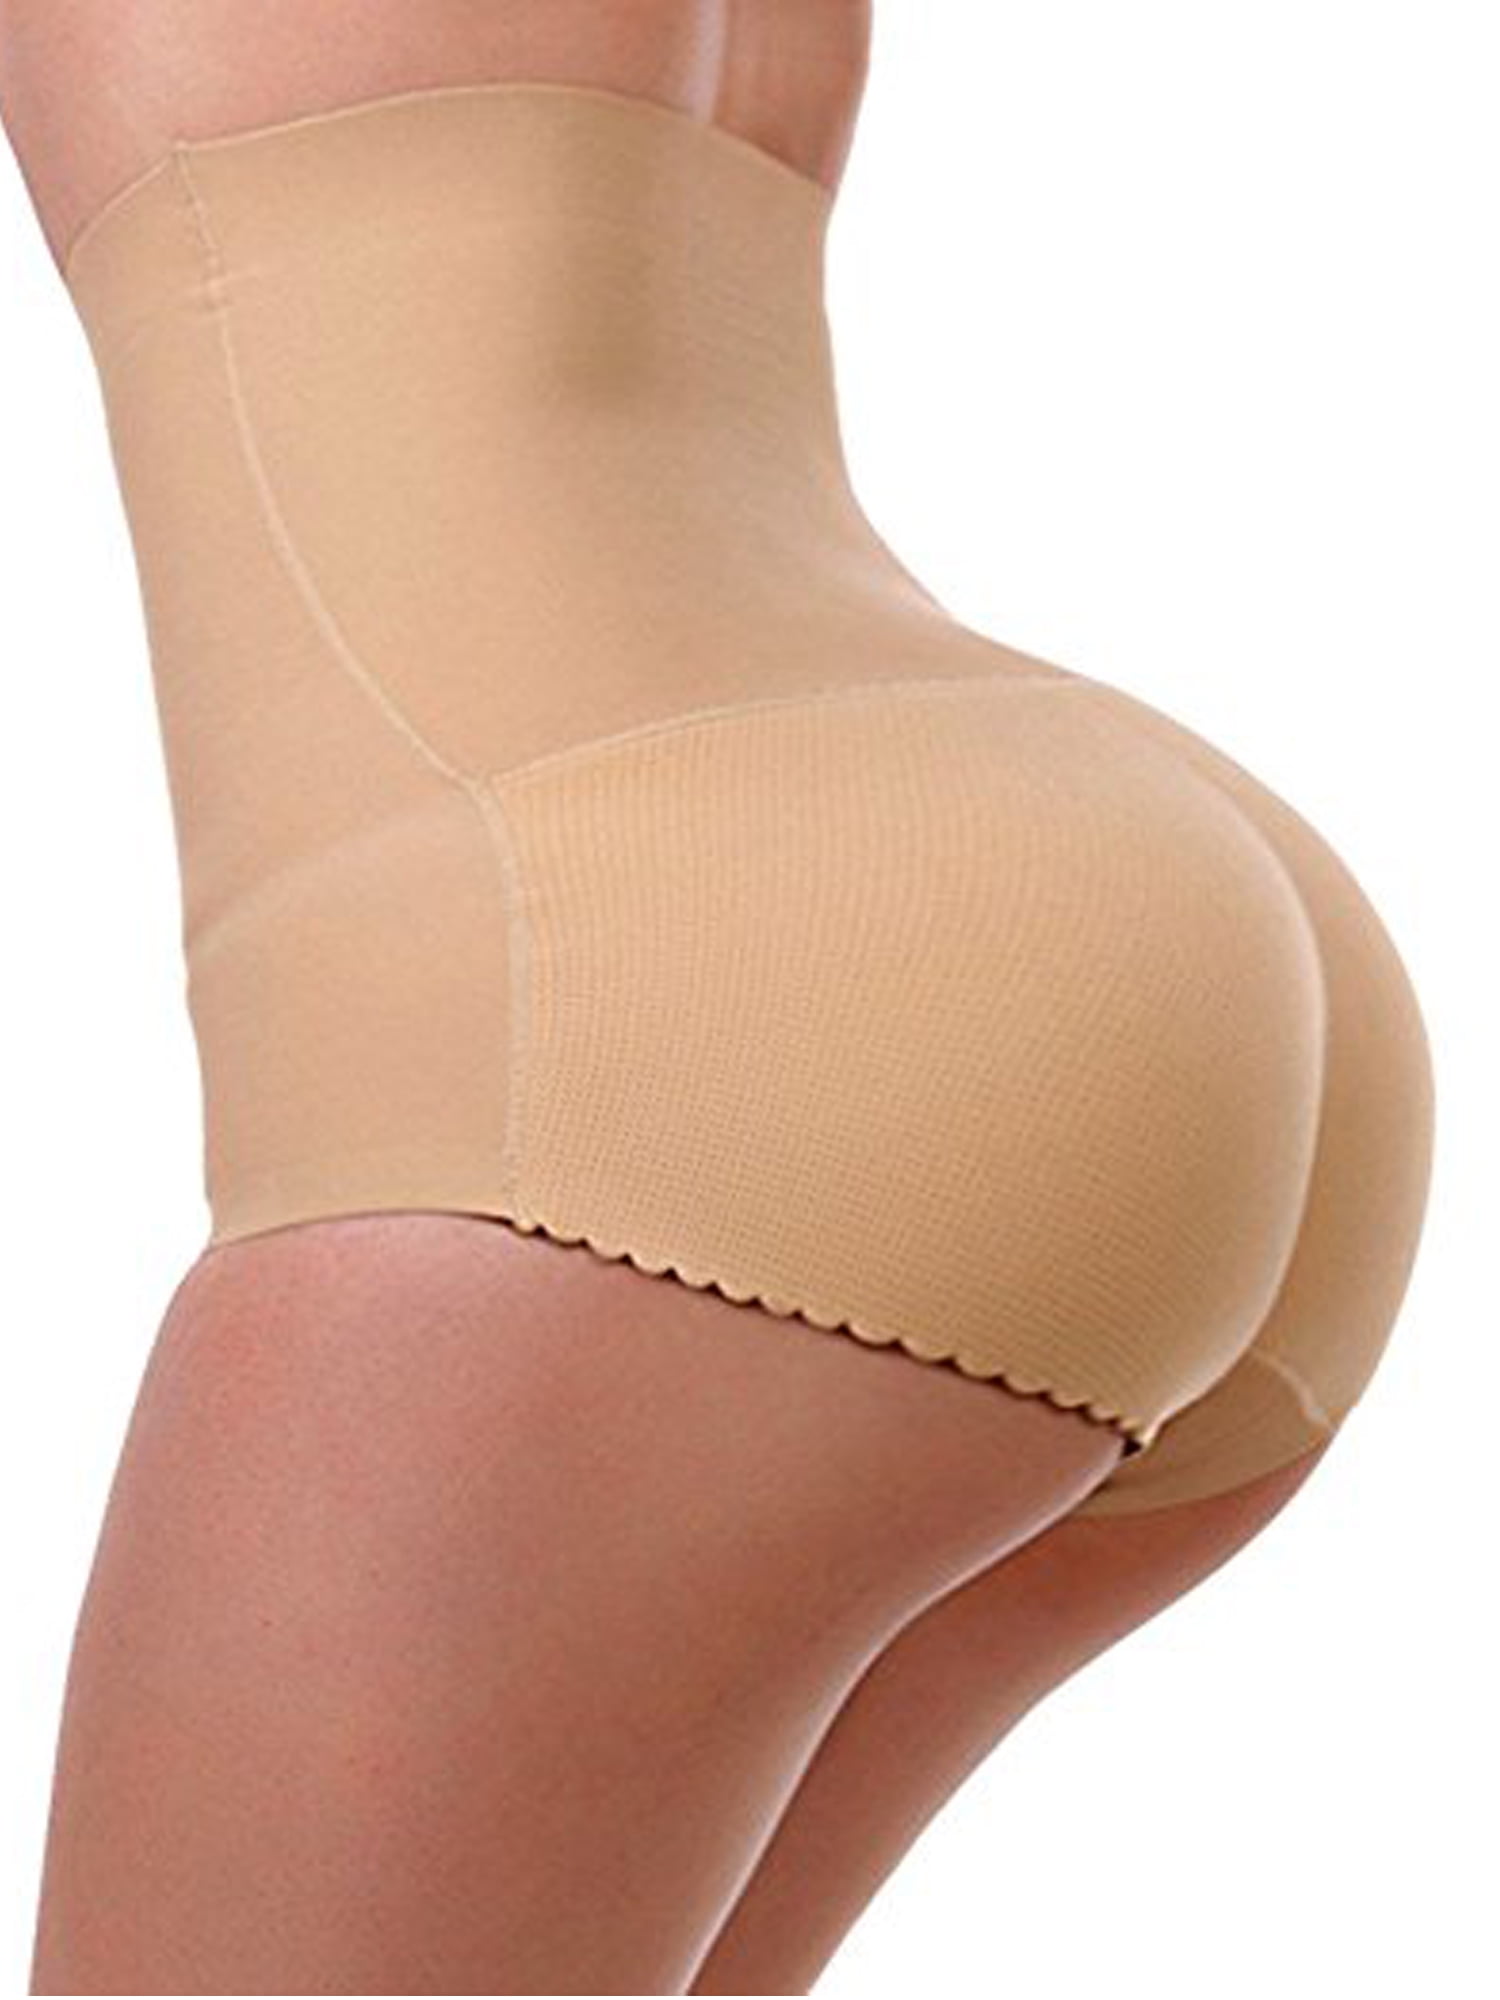 Body Shaper With Butt Pads High Waisted Butt Lifter Panty Padded Hip Shapewear for Women Tummy Control Underwear